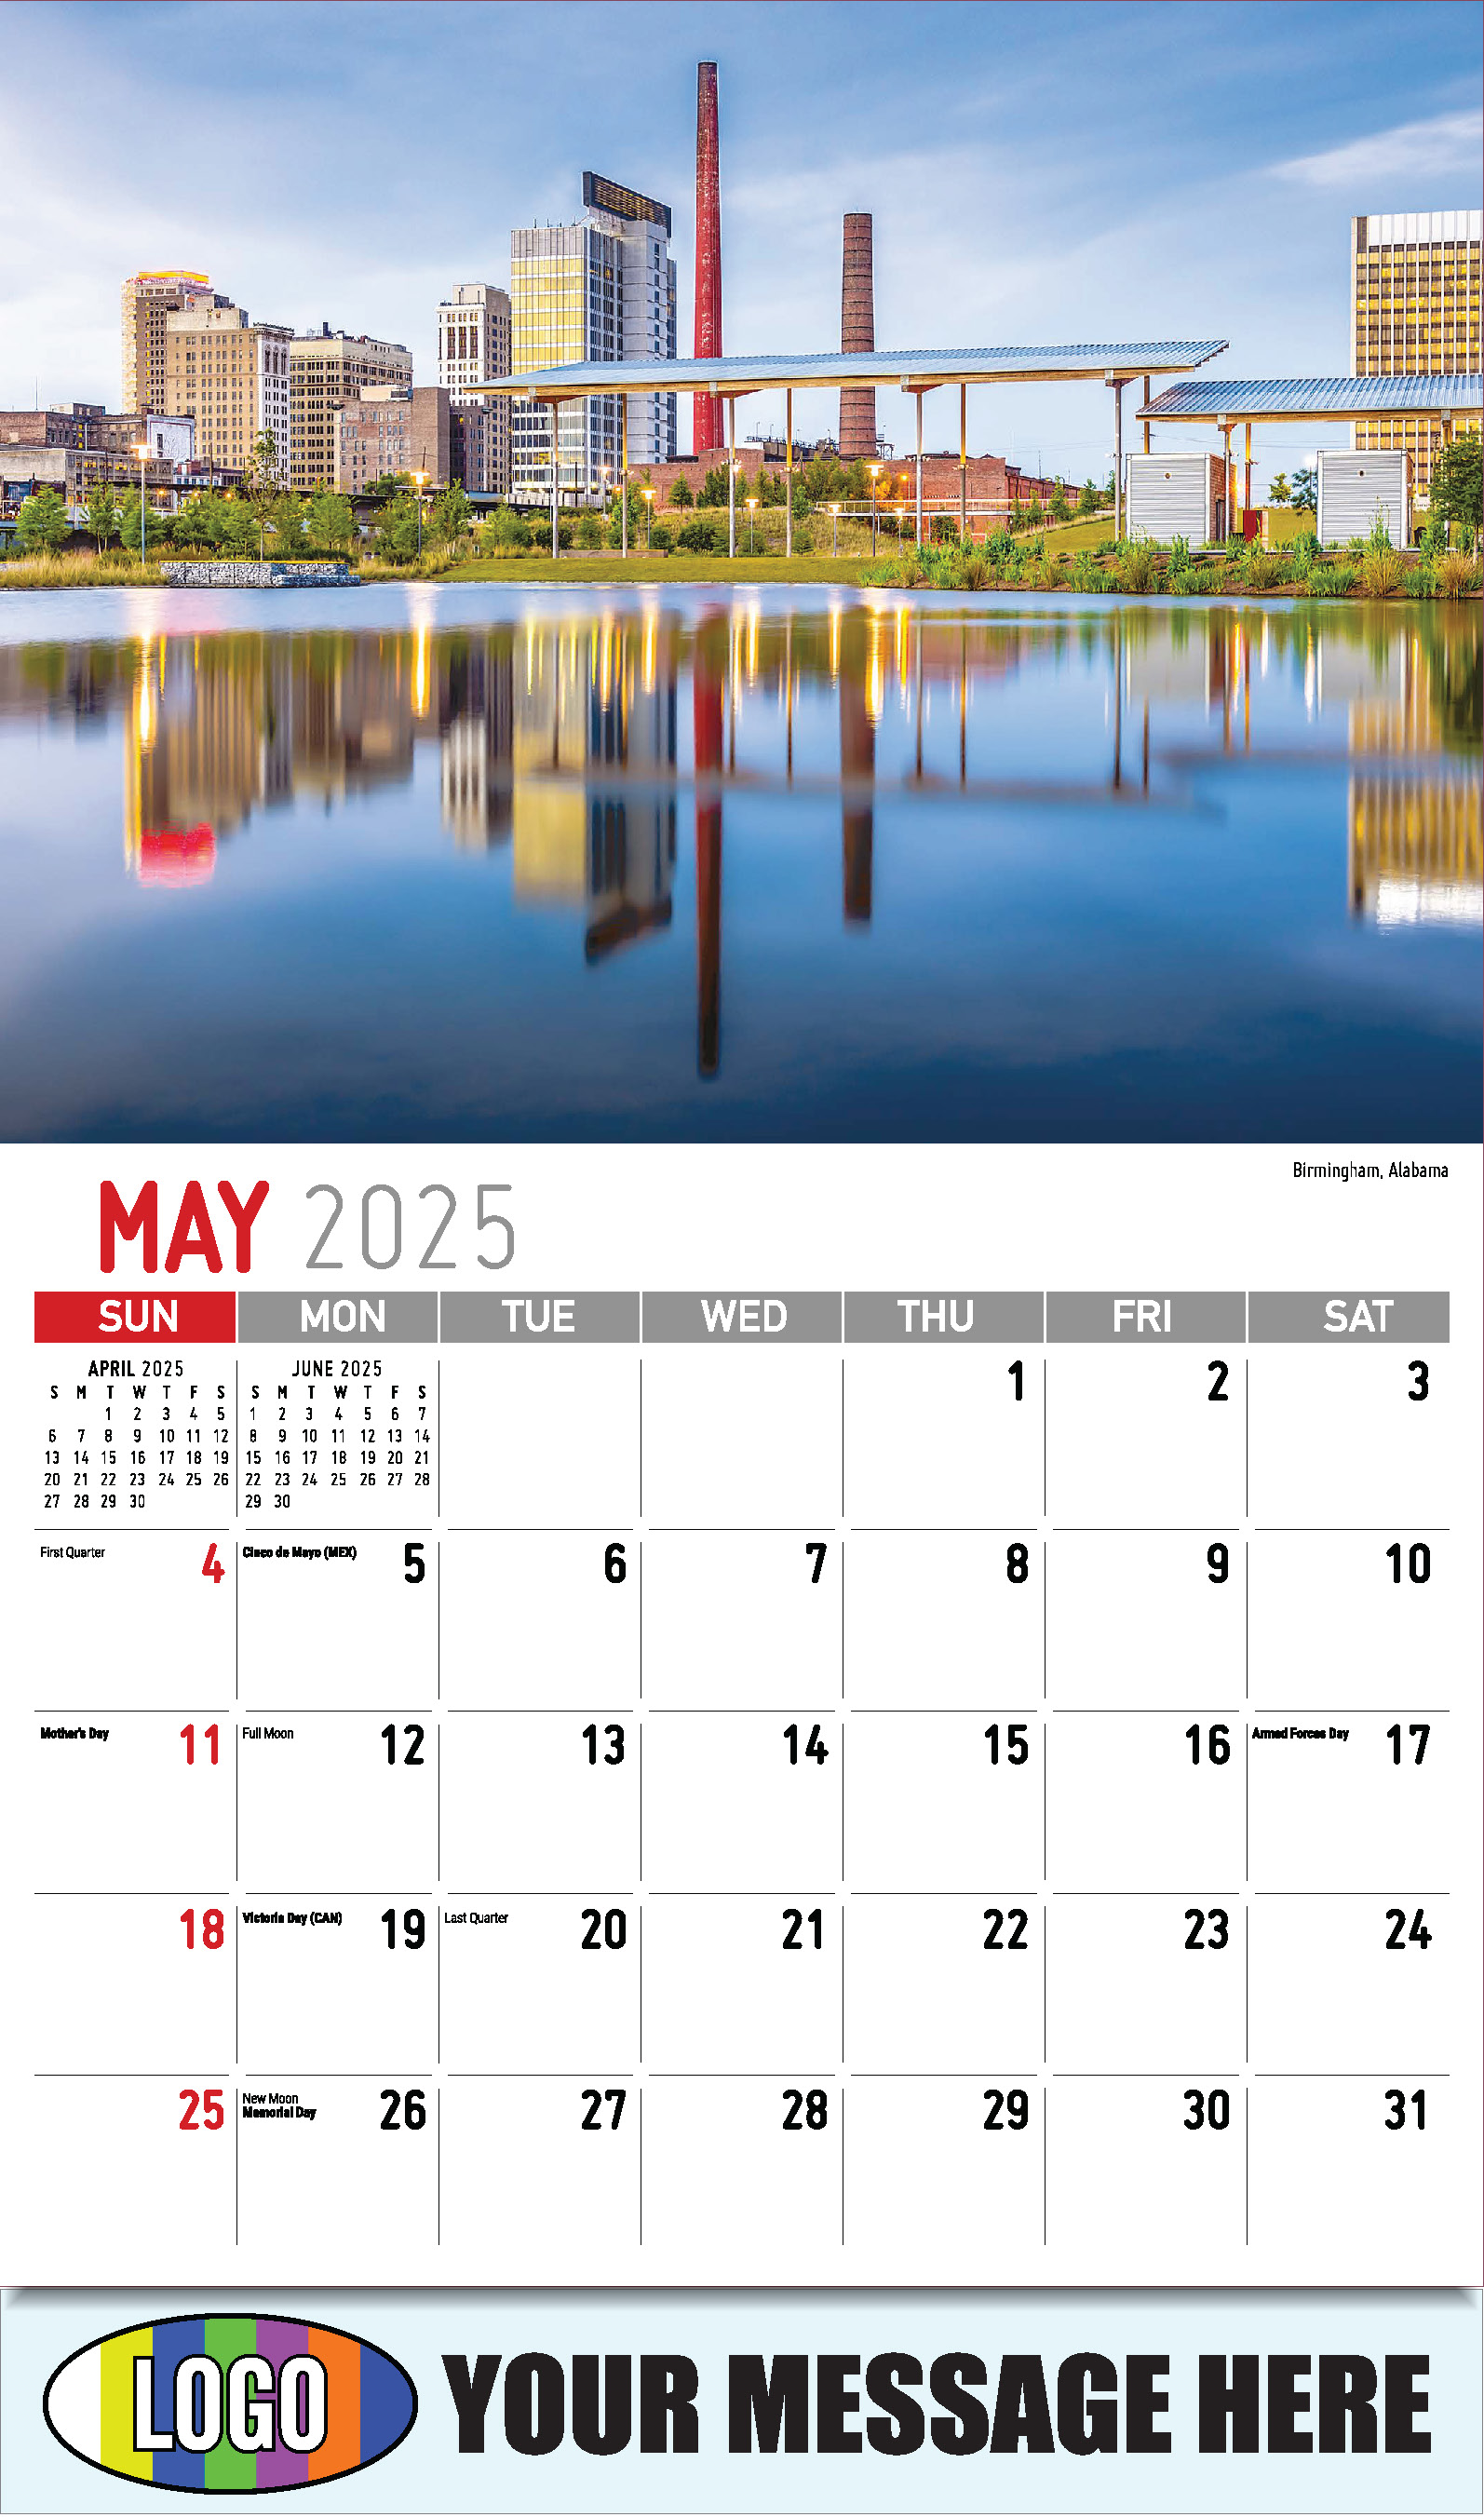 Scenes of Southeast USA 2025 Business Promo Wall Calendar - May